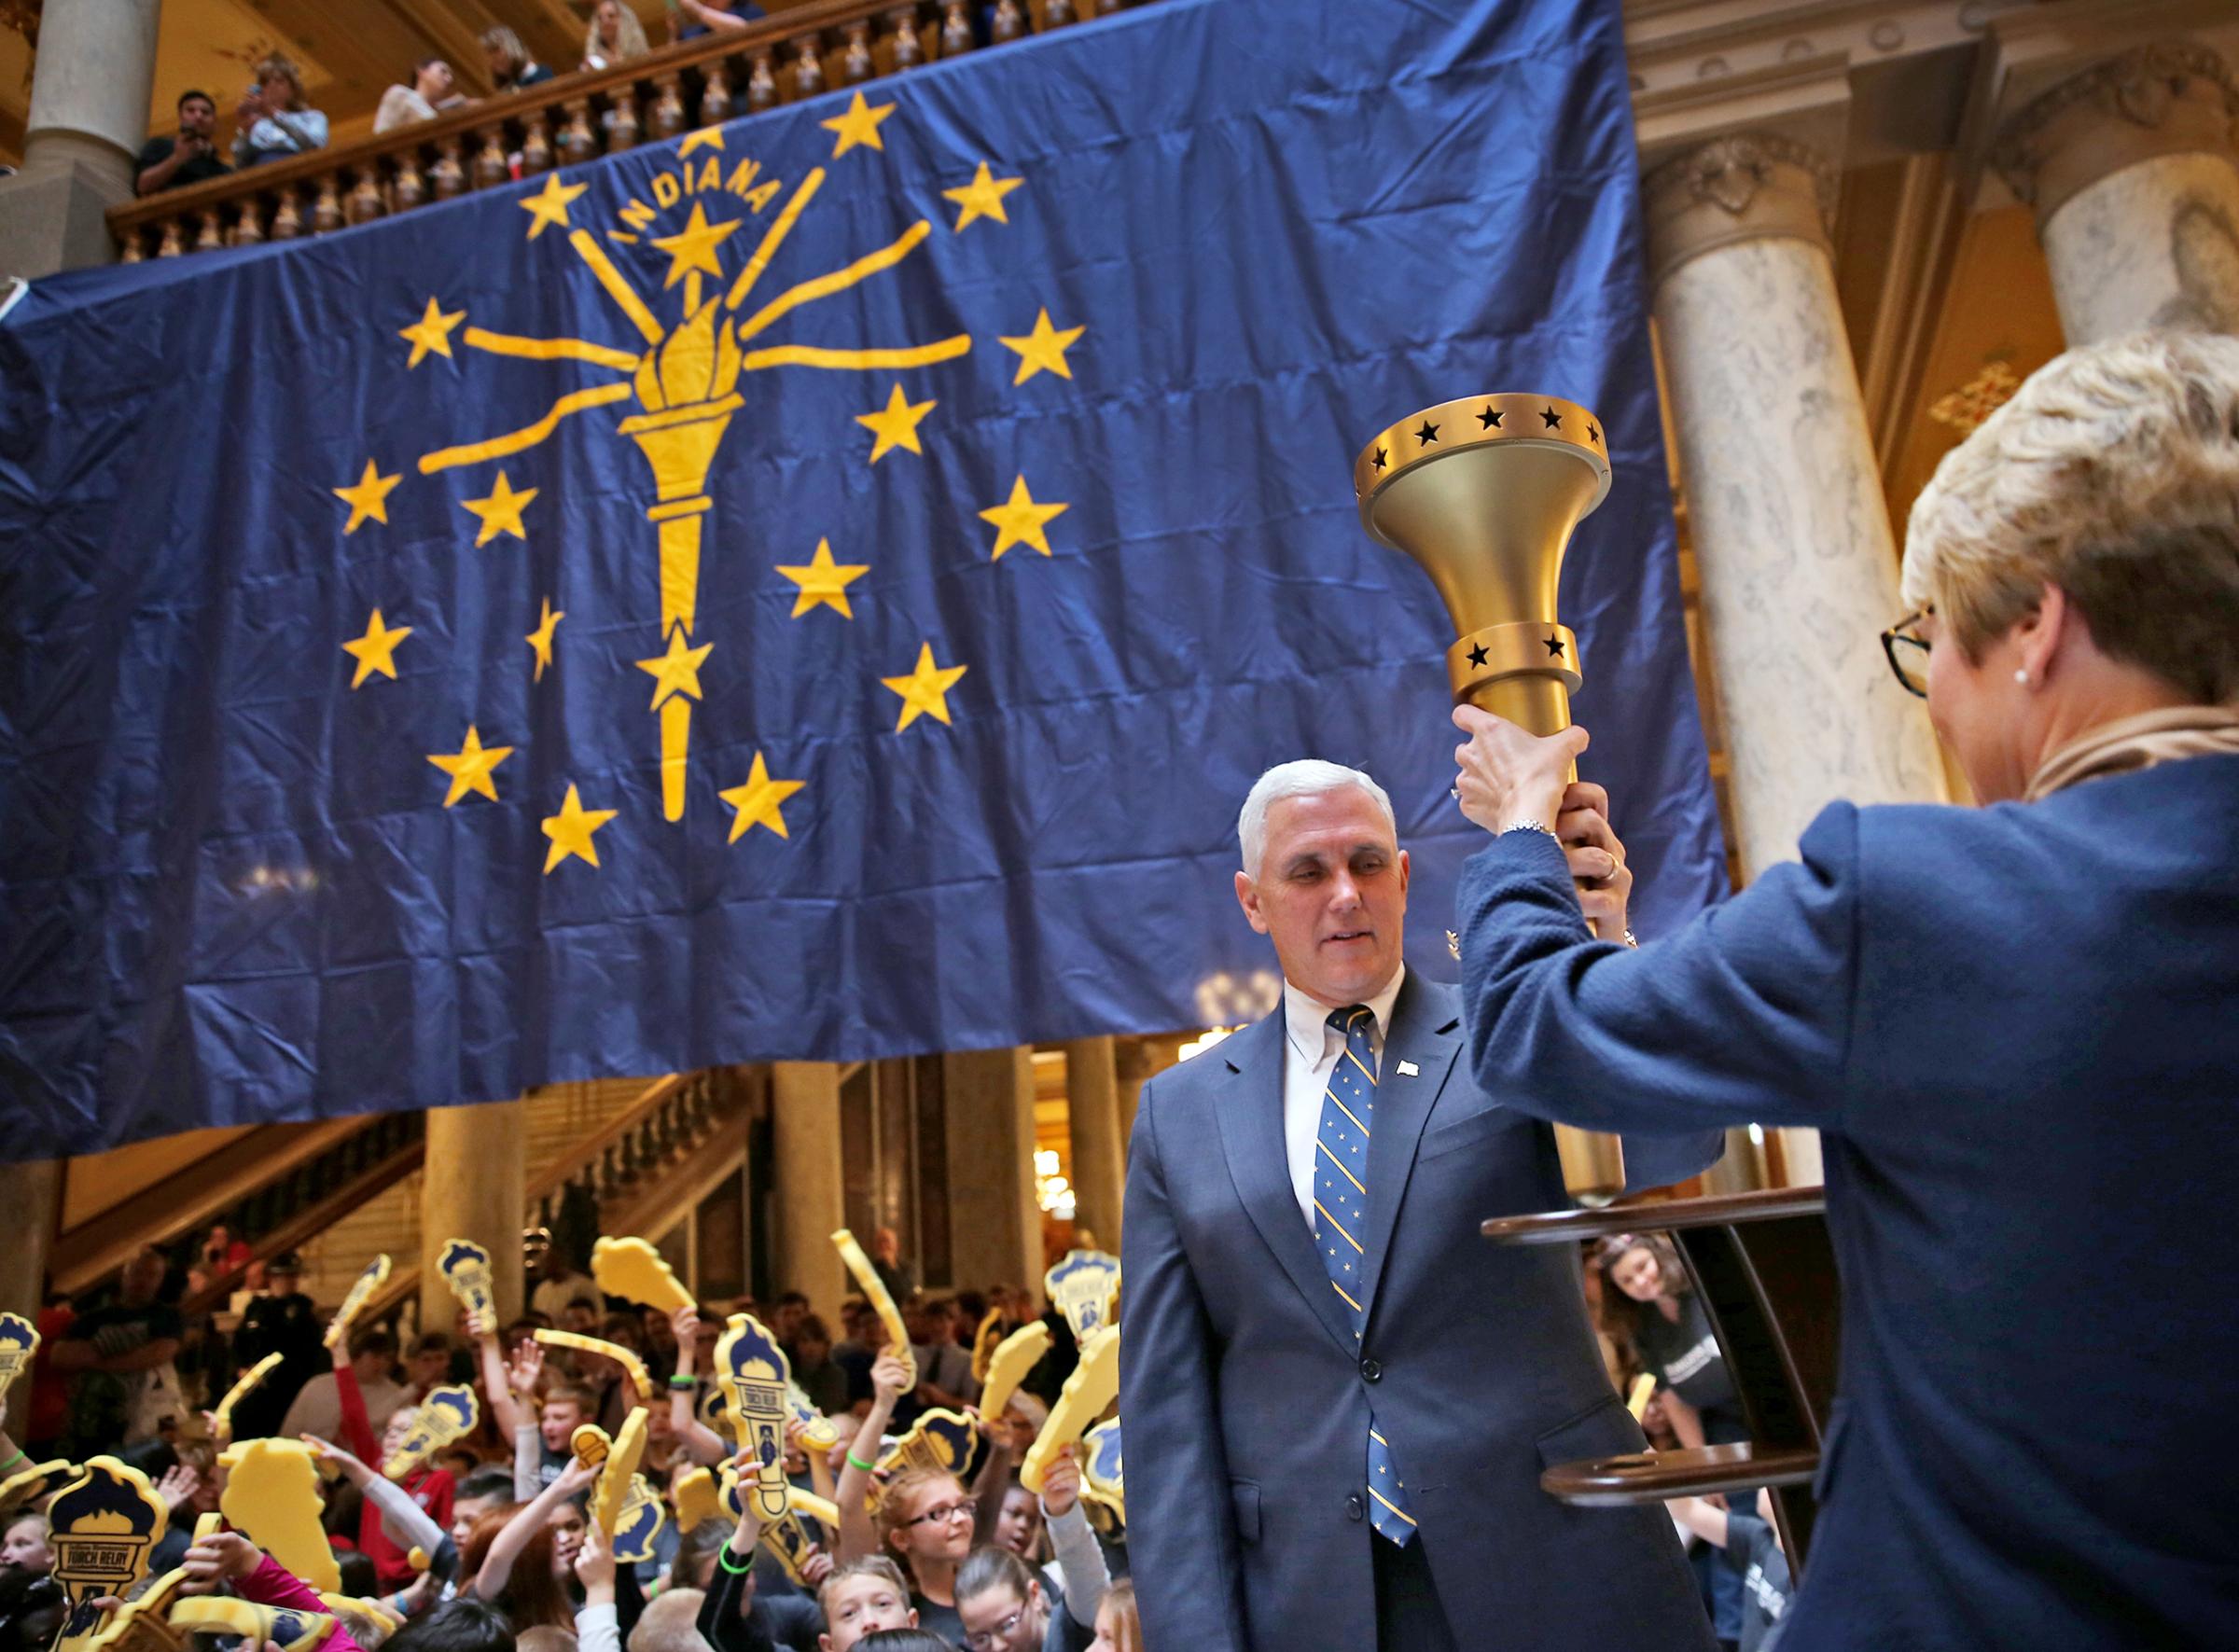 Ind. Gov. Mike Pence and Lt. Goc. Sue Ellspermann unveil the Indiana Bicentennial Torch during a Statehouse event in Indianapolis on Dec. 11, 2015.